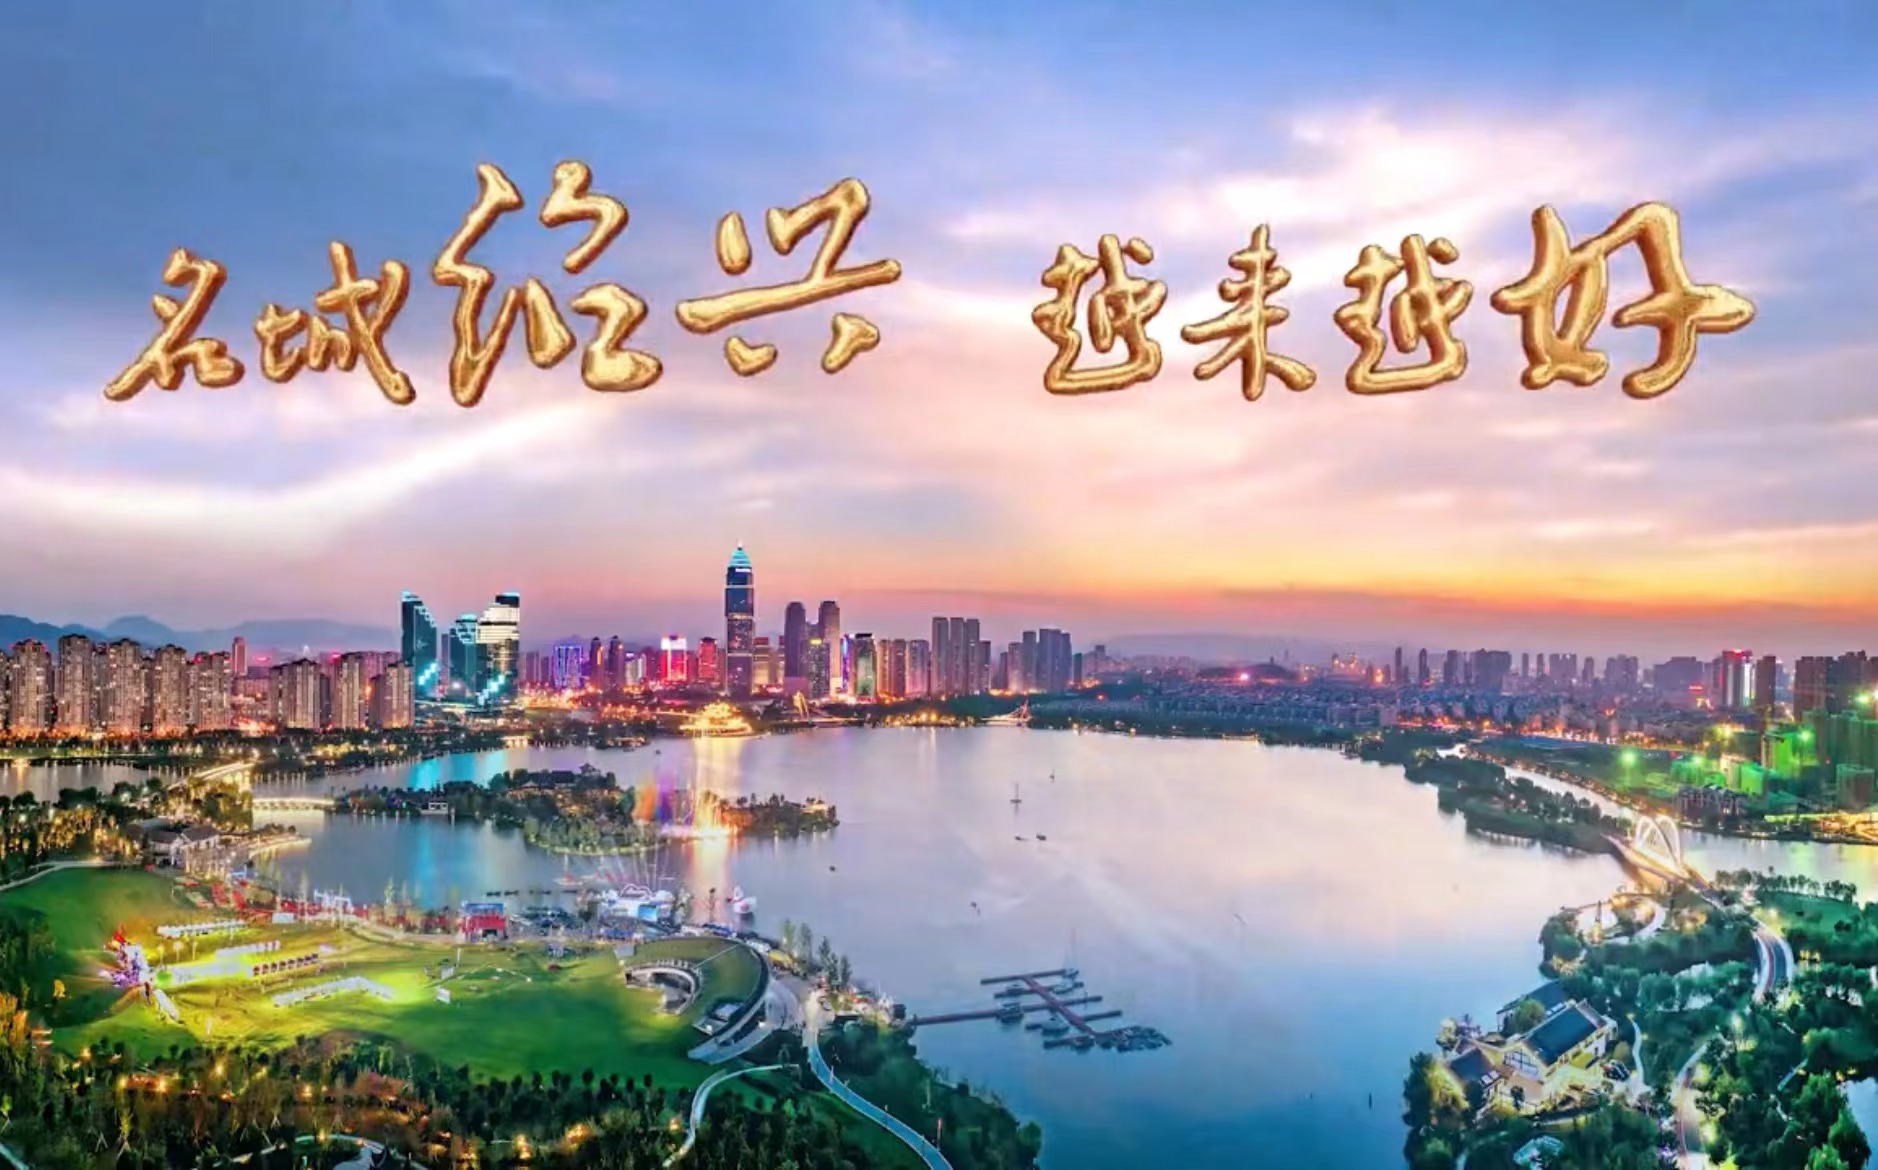 Famous city, growing popularity